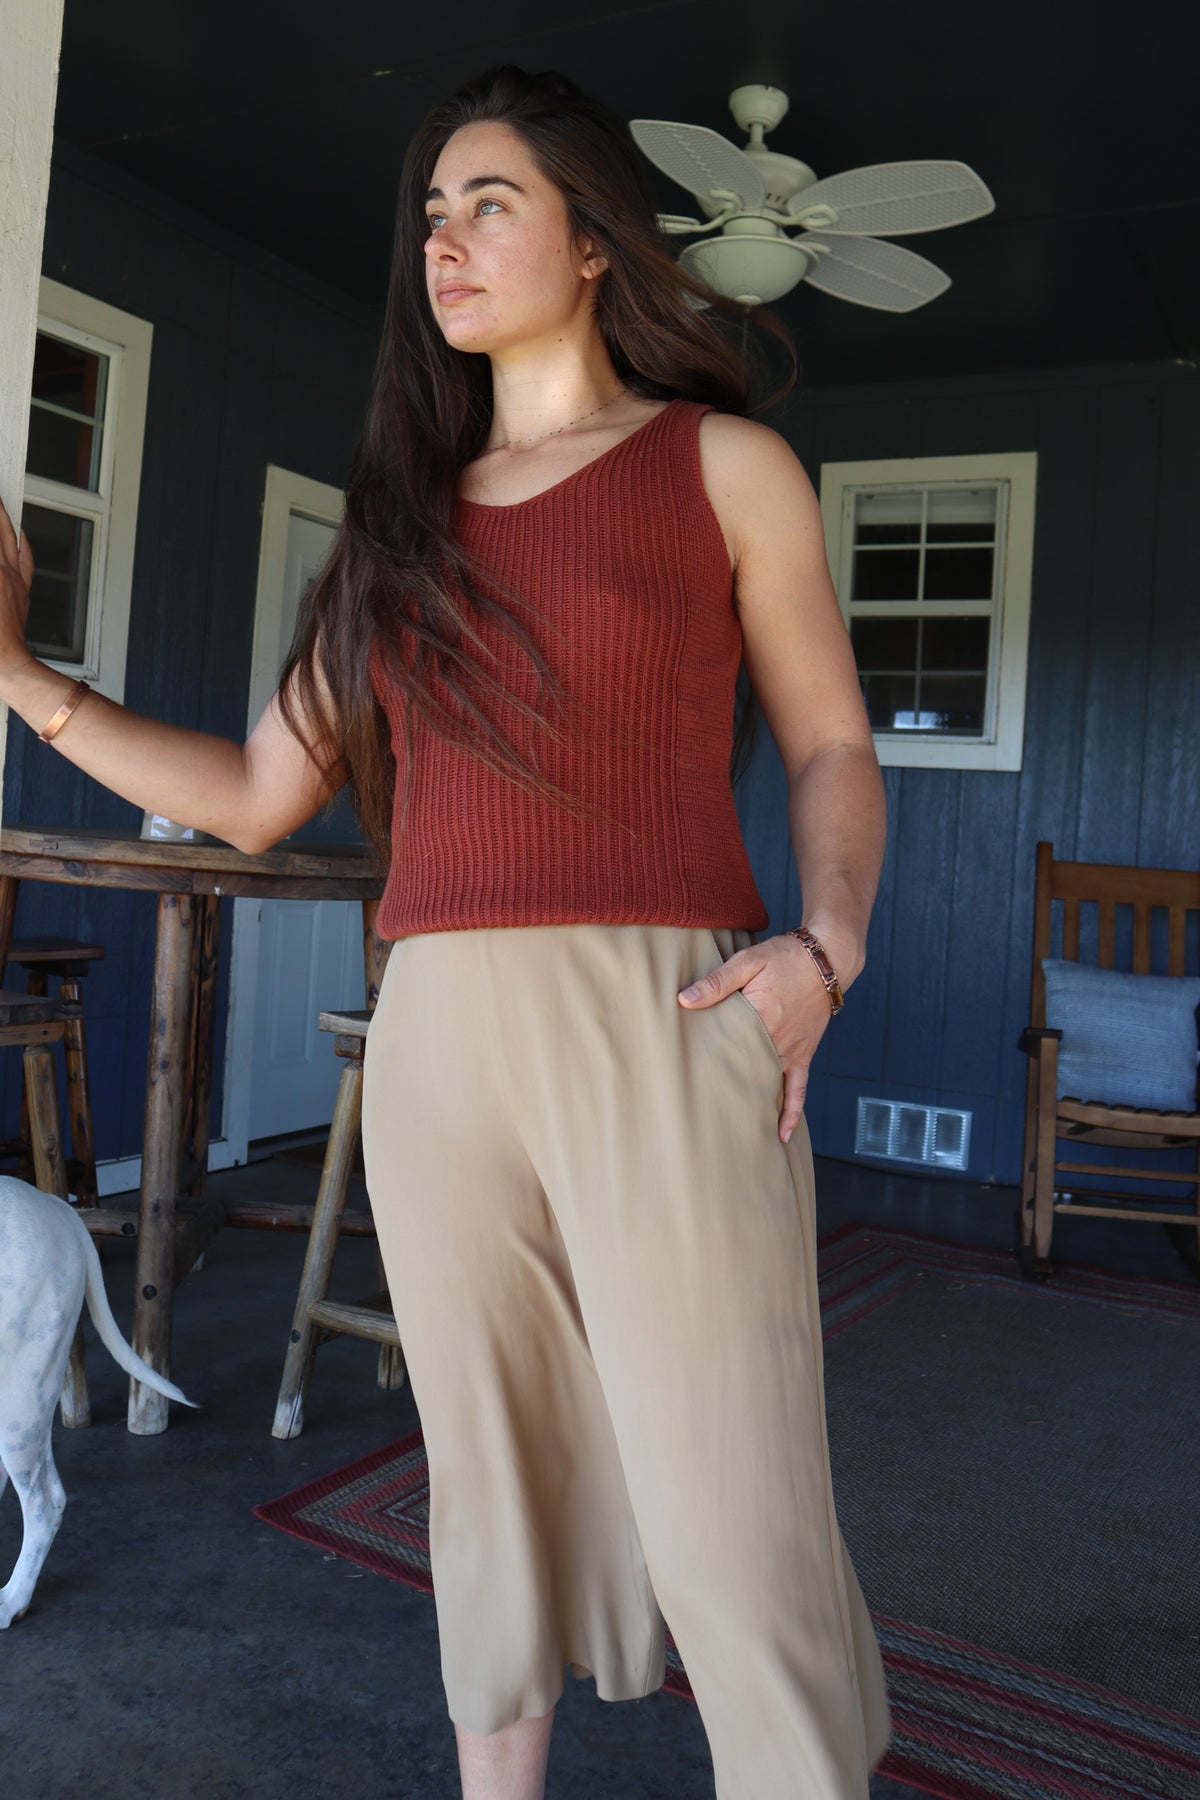  Woman's knit sweater tank made of organic cotton cashmere blend in rust cinnamon brown